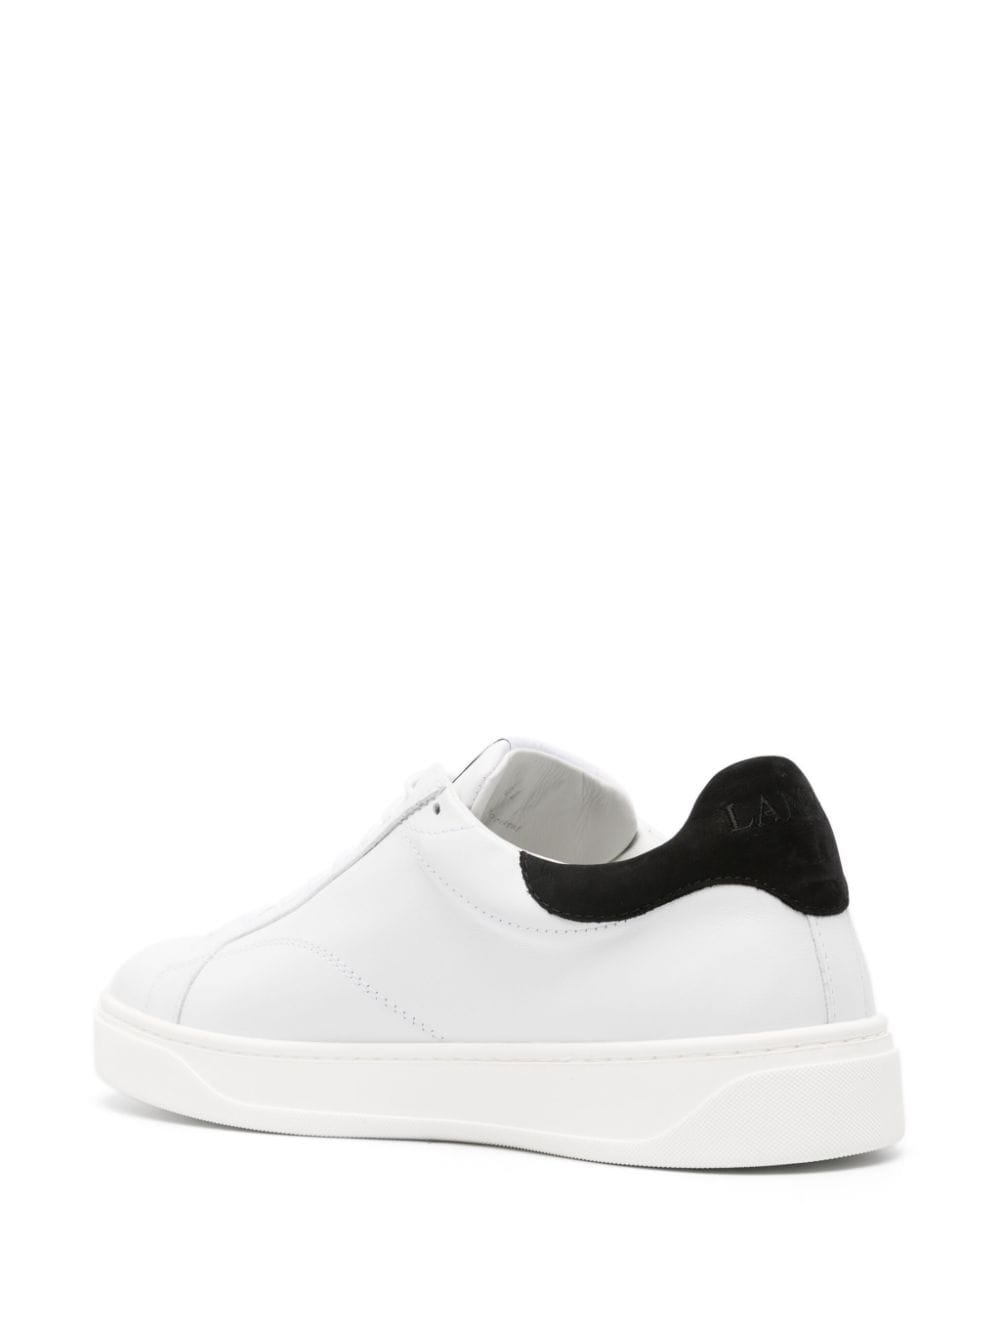 DDB0 LEATHER LOW-TOP SNEAKERS